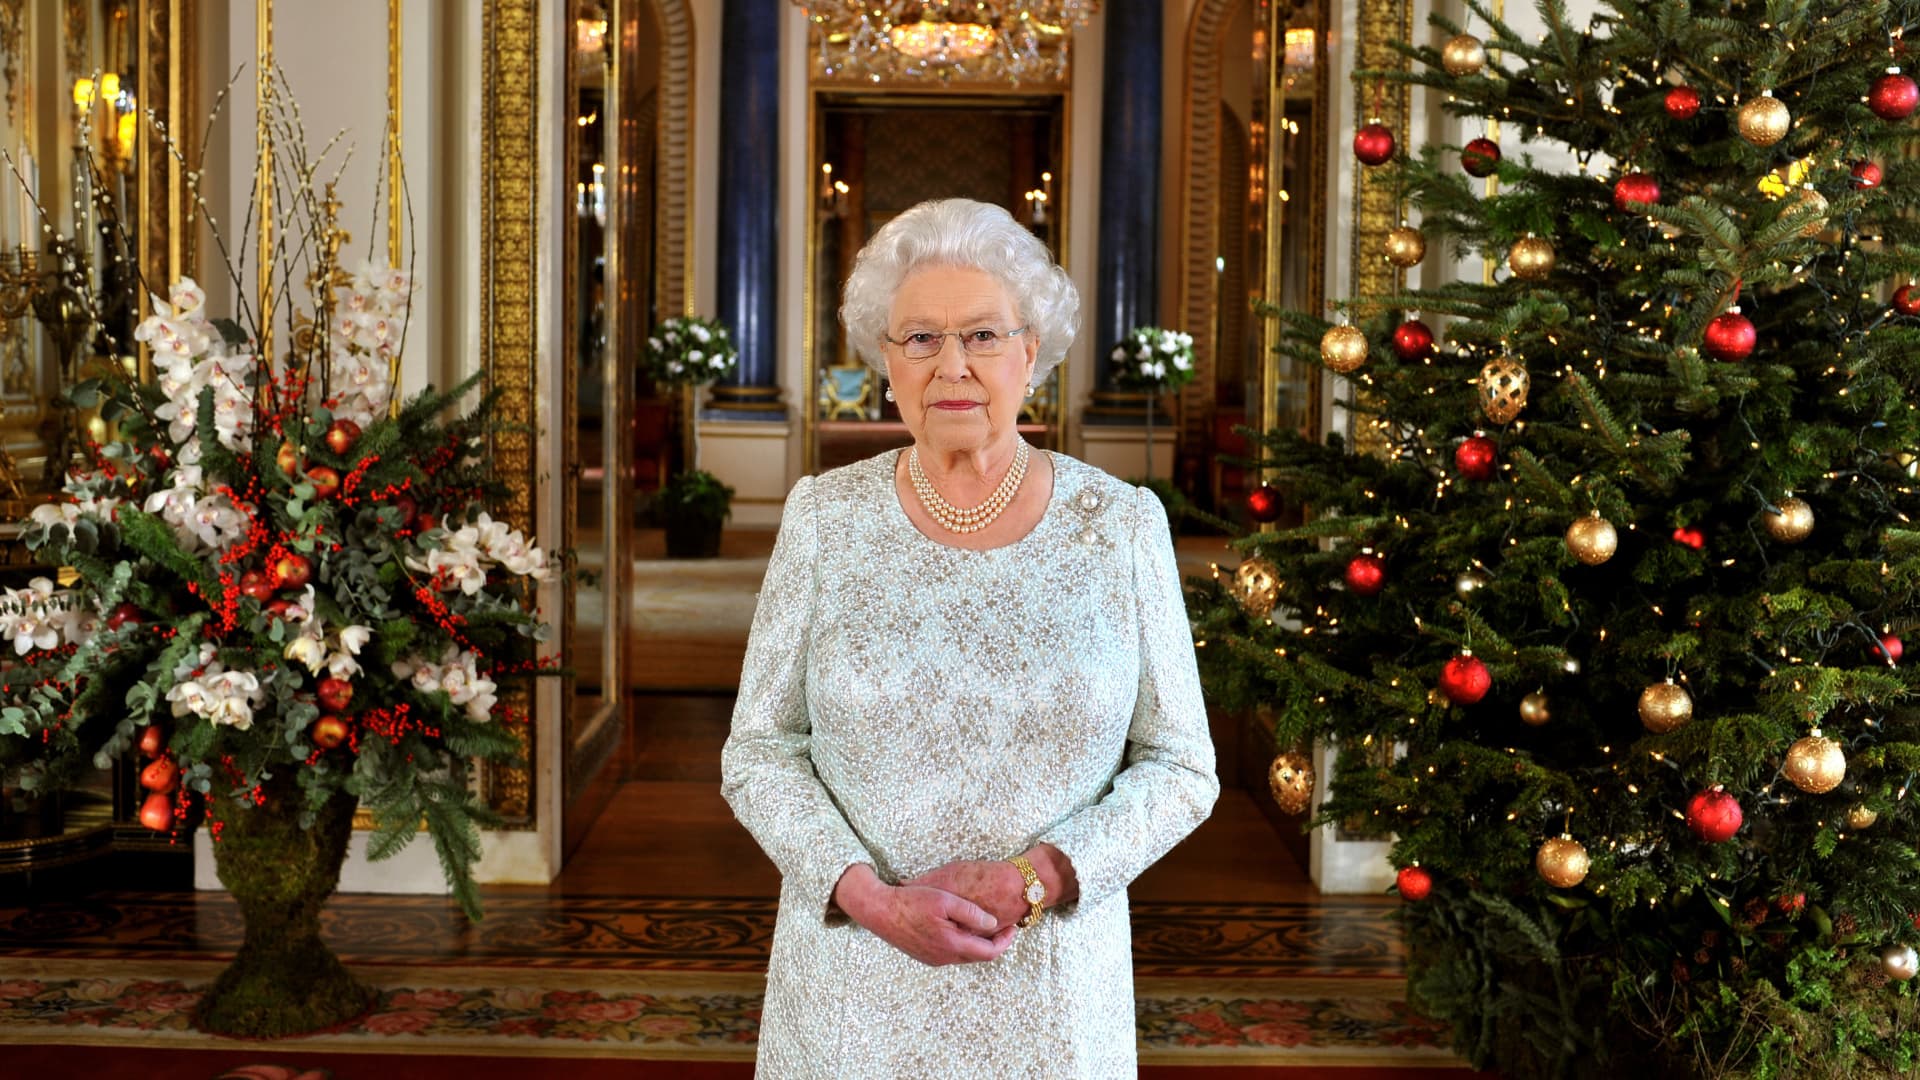 Queen Elizabeth II records her Christmas message to the Commonwealth, in the White Drawing Room at Buckingham Palace